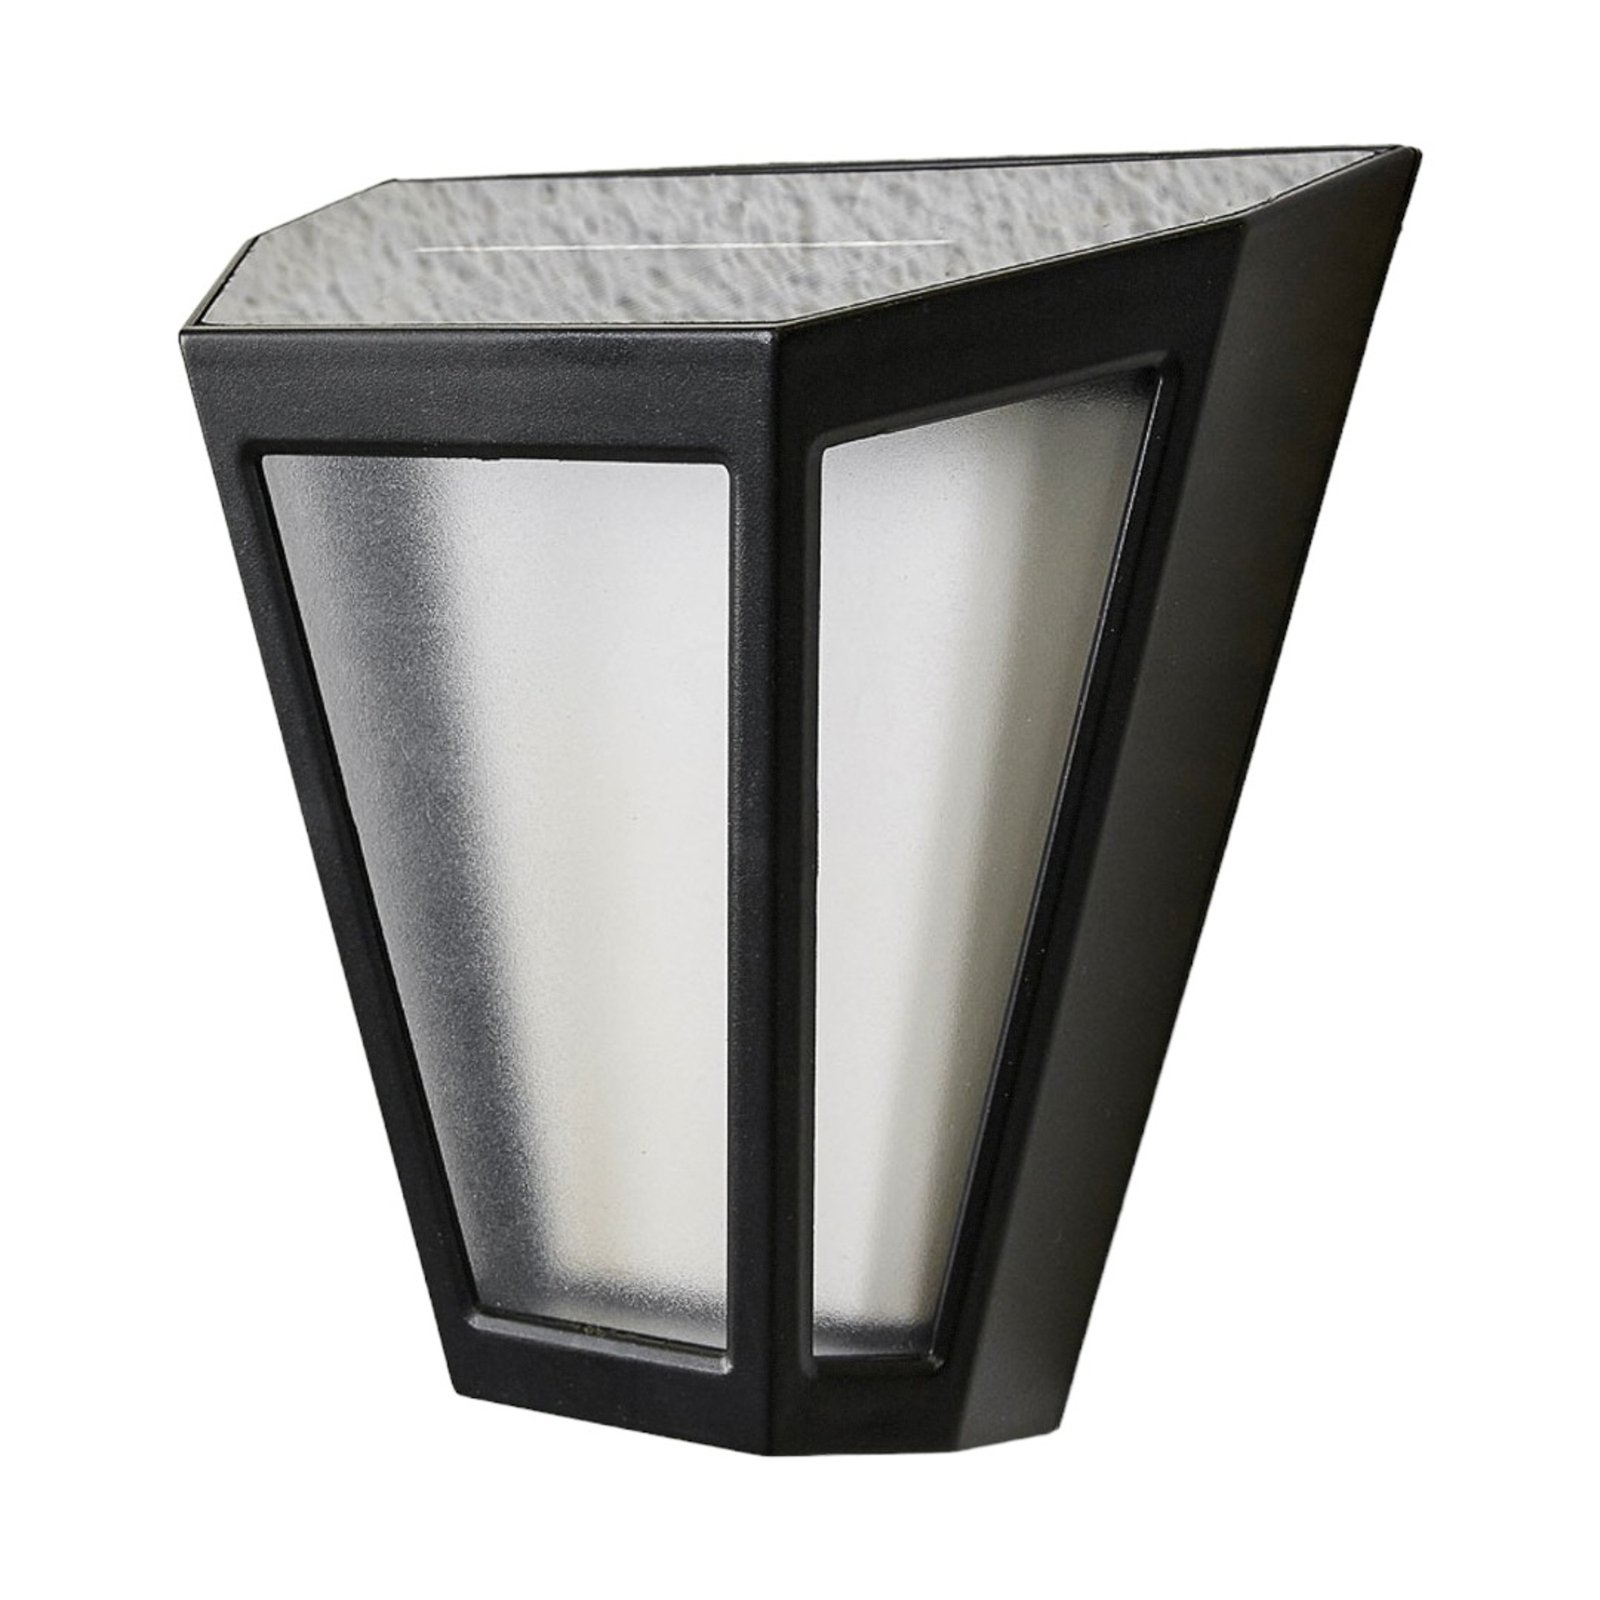 LED solar wall light Yago, frosted lampshade